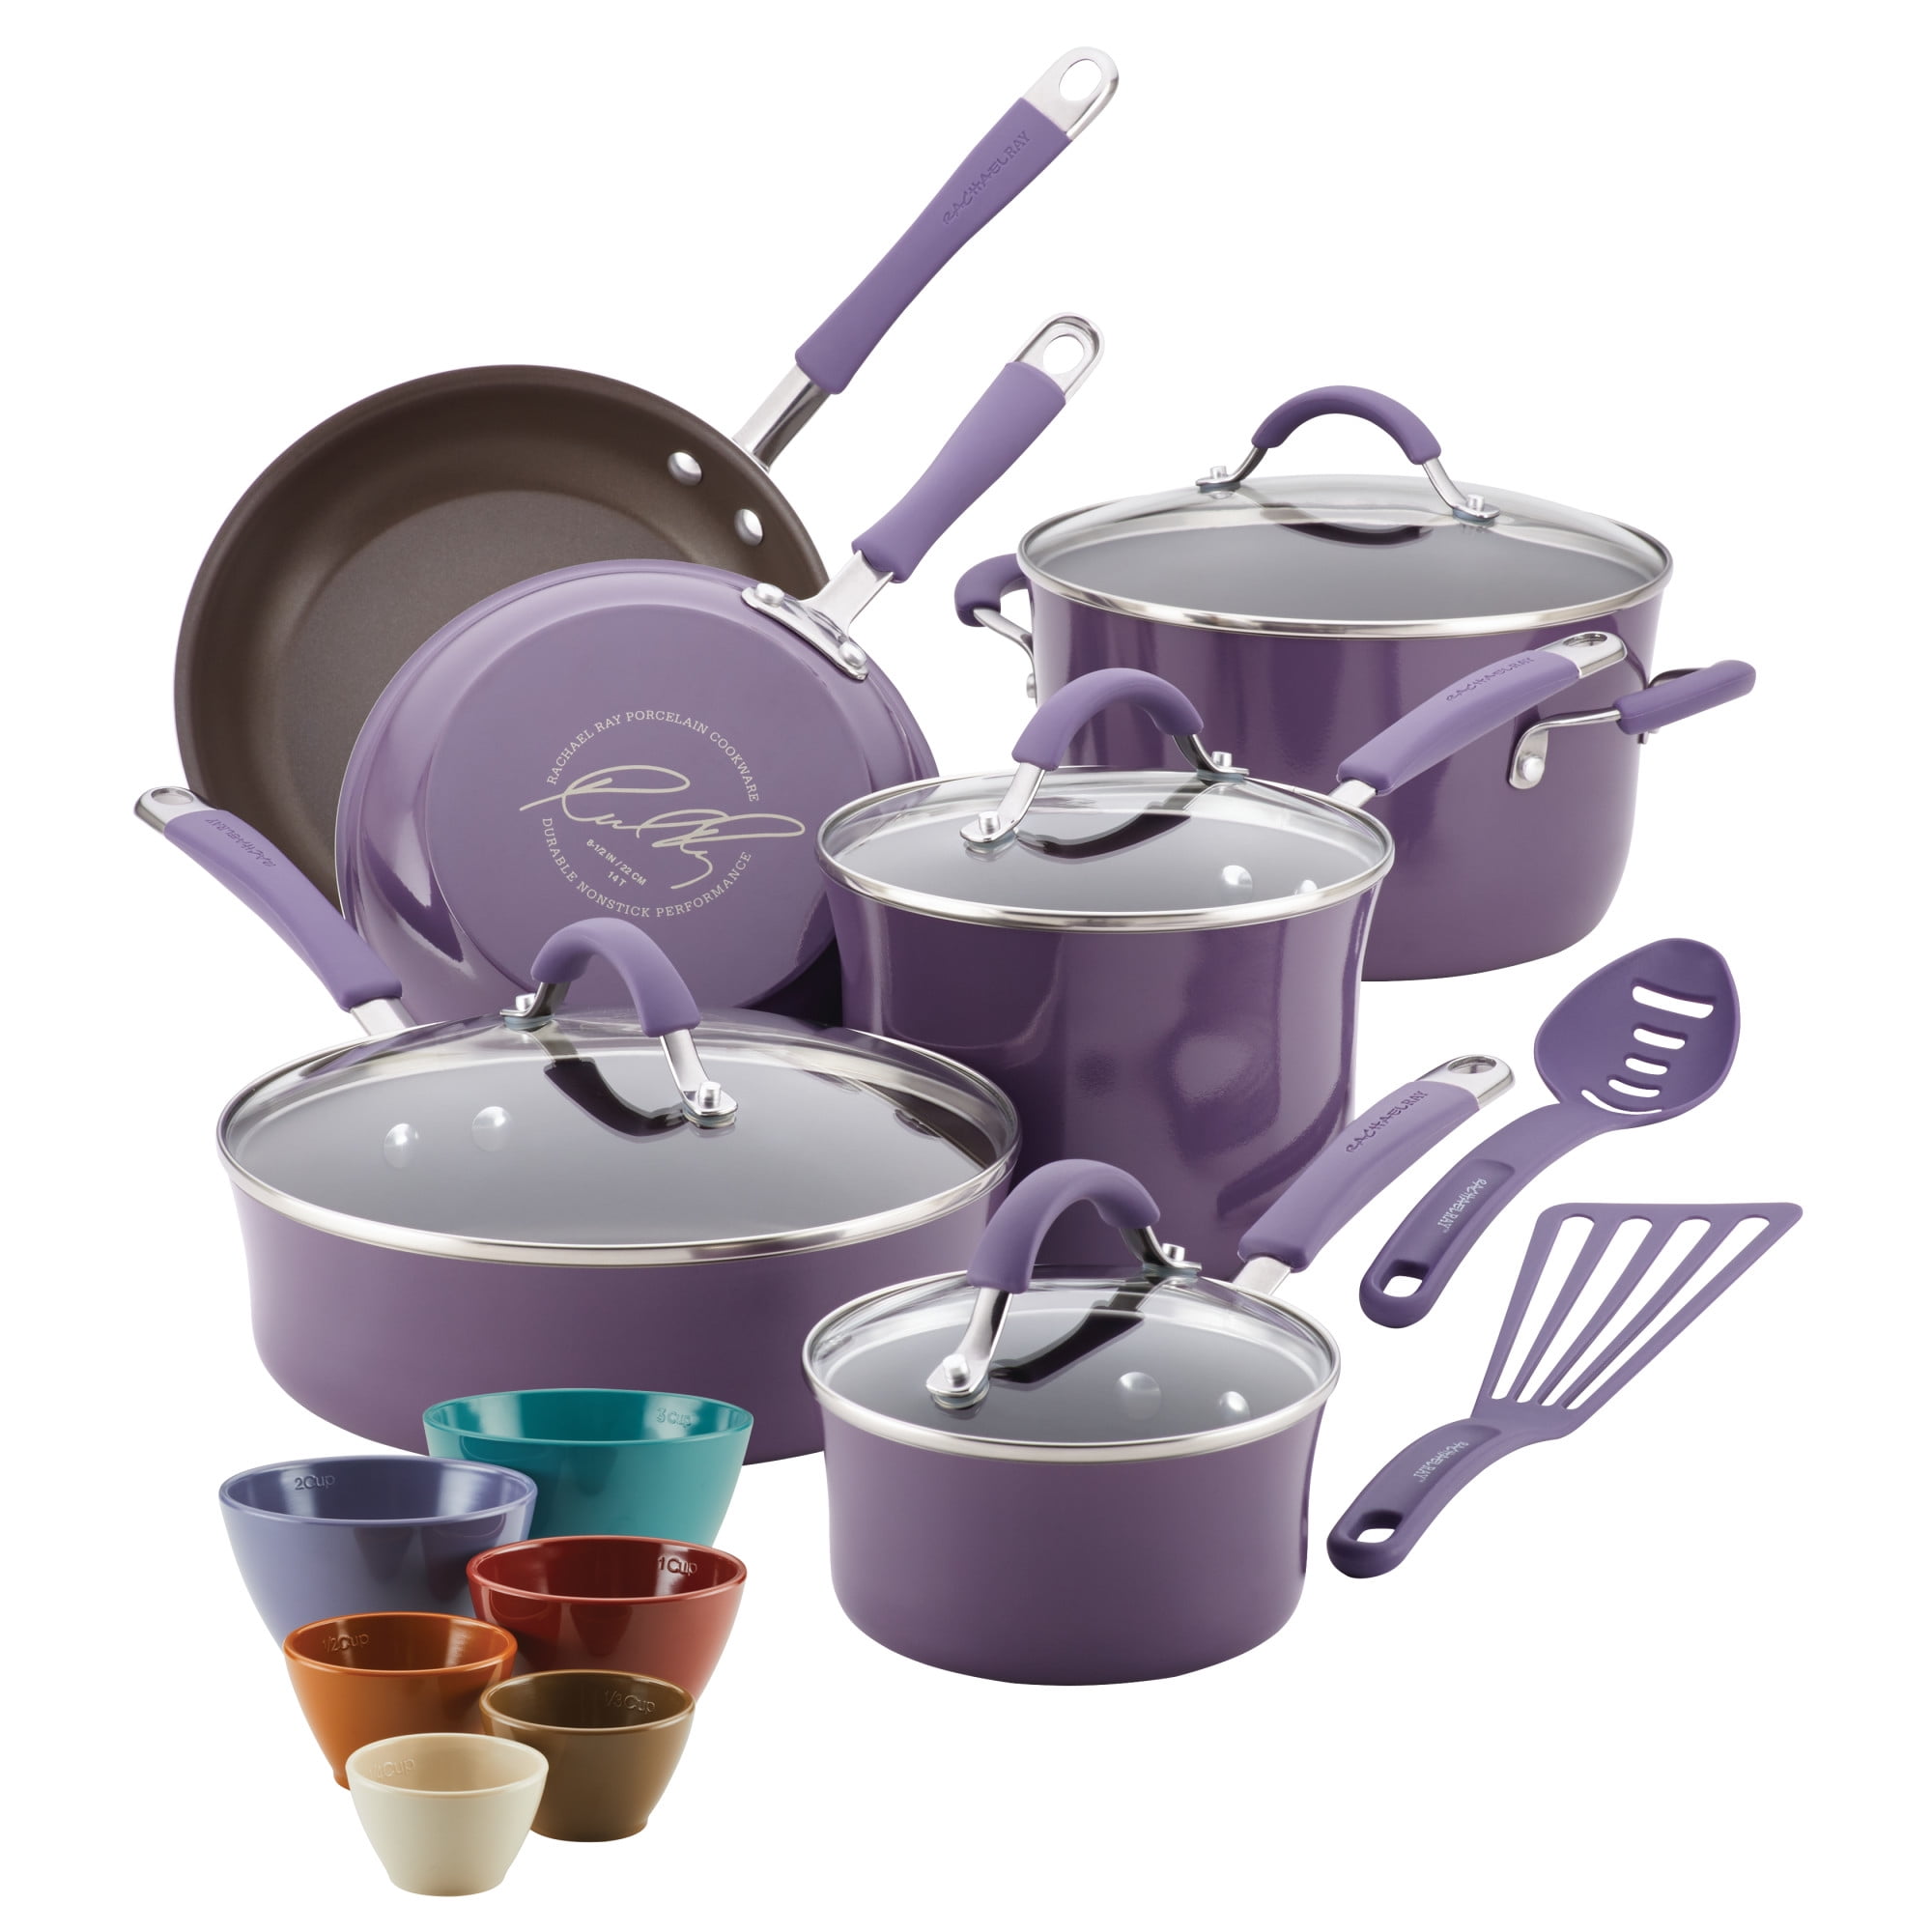 Rachael Ray Cucina Hard Enamel Nonstick Cookware and Measuring Cup Set, 18-Piece, Lavender